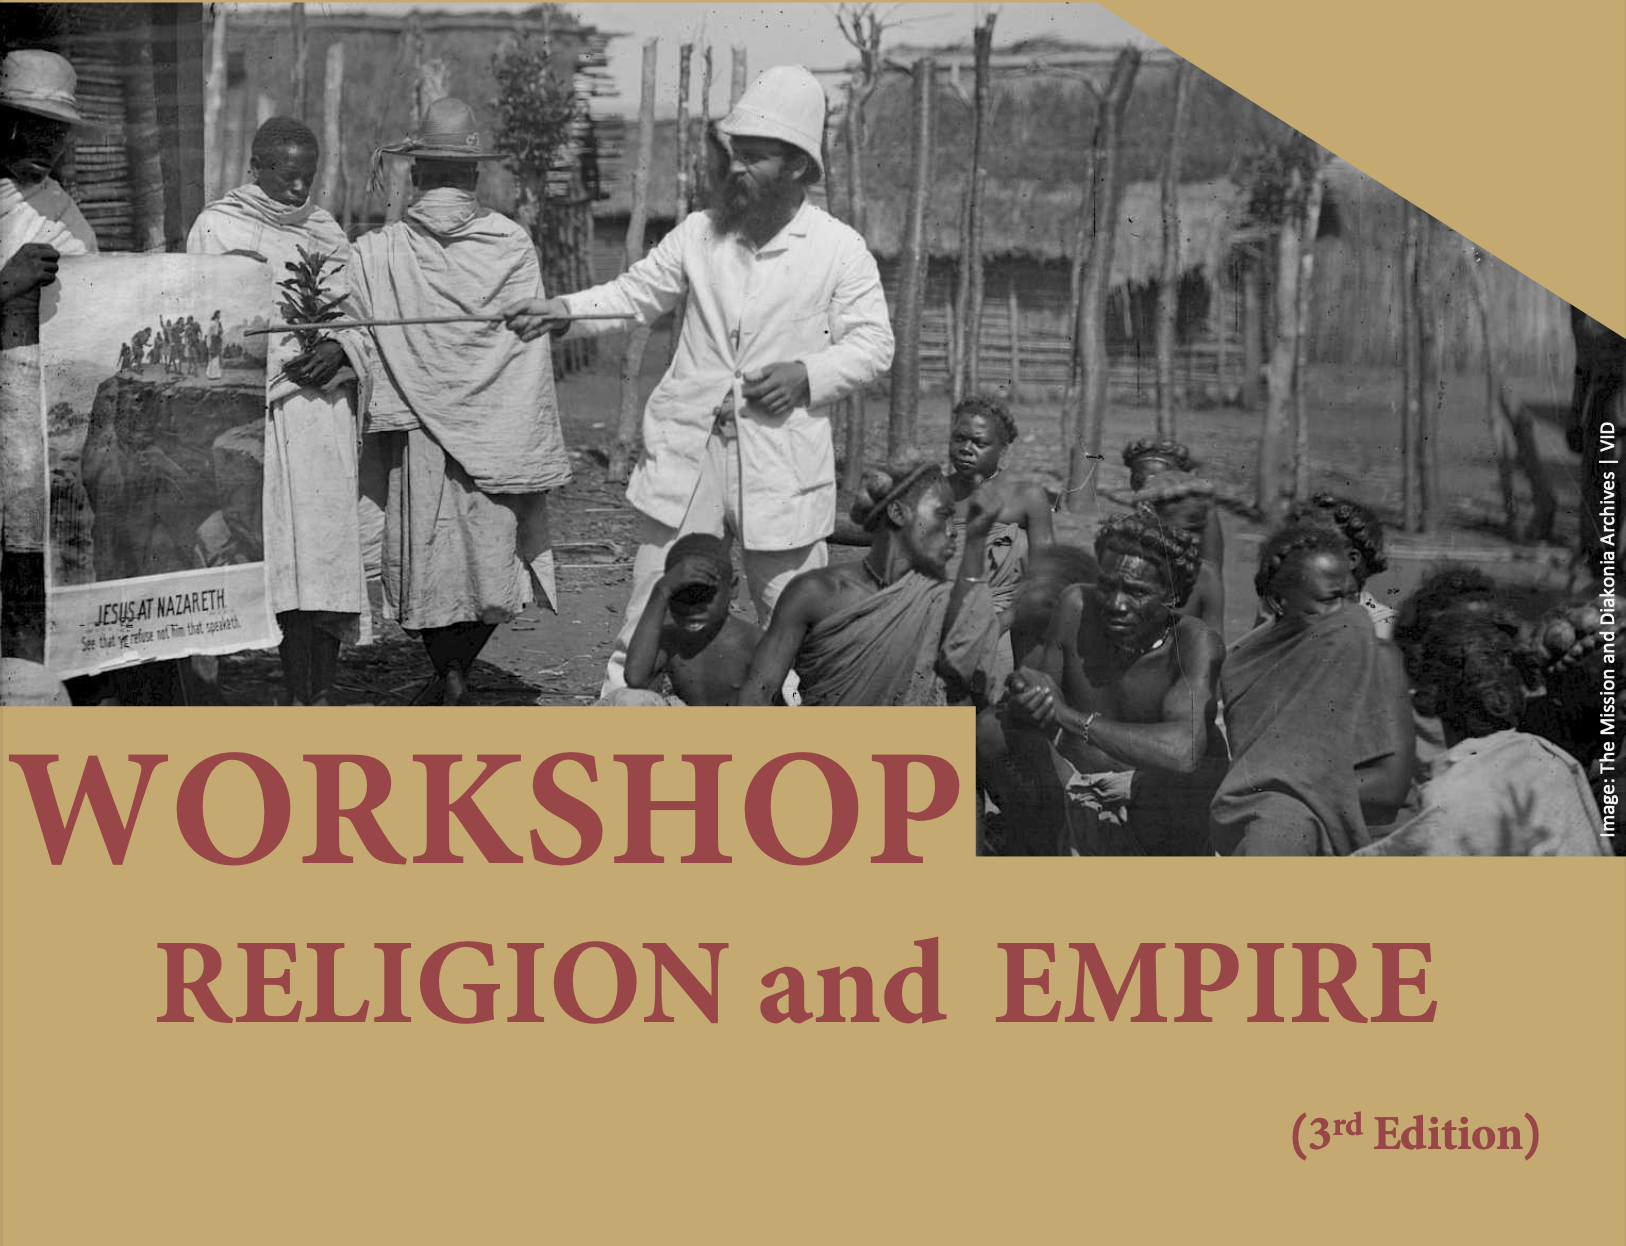 Workshop Religion and Empire (3rd edition)